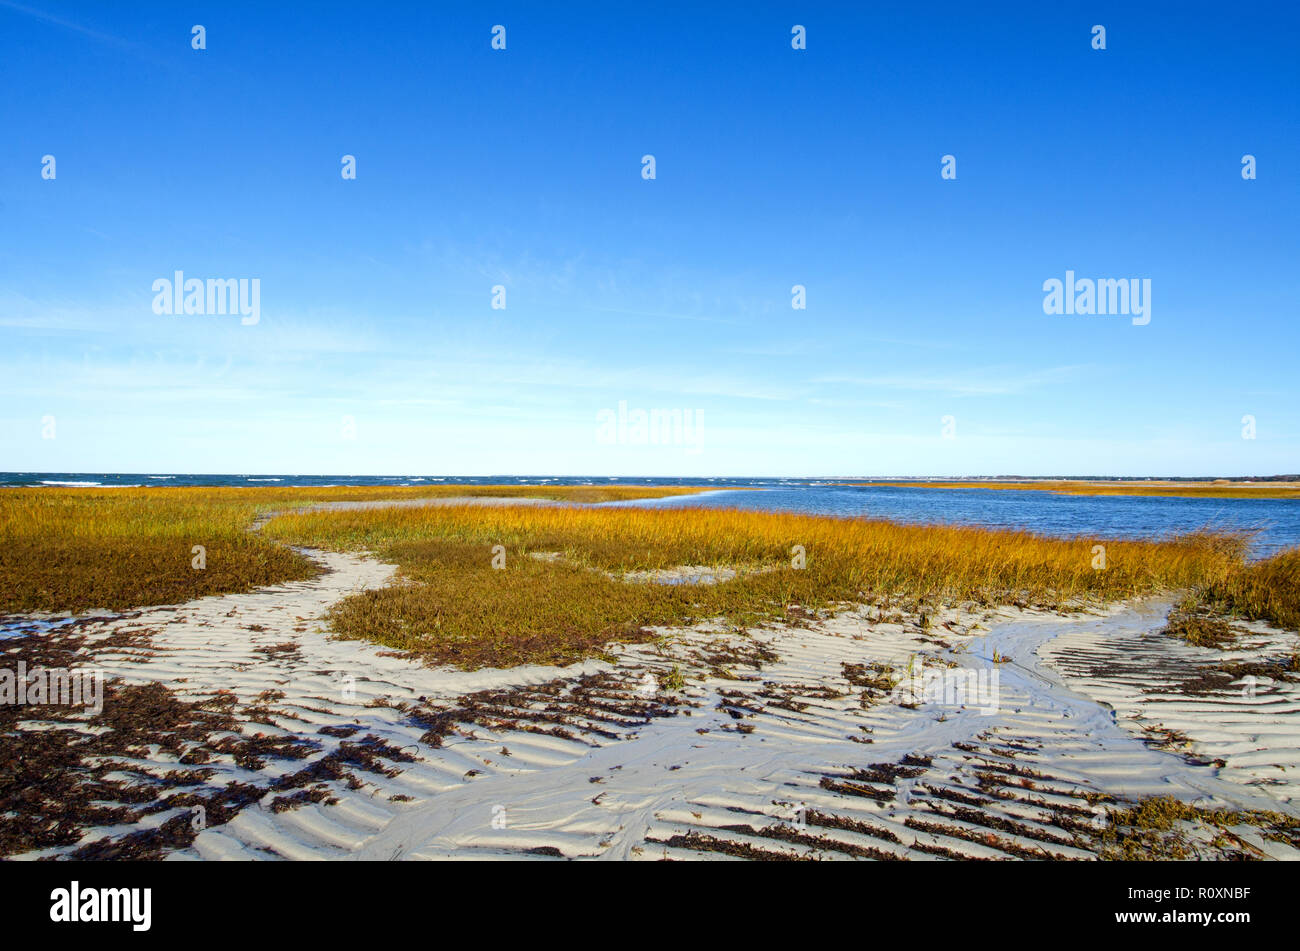 Skaket Beach in Orleans, Cape Cod, Massachusetts, USA at low tide with a clear, blue sky and sandy beach grass Stock Photo